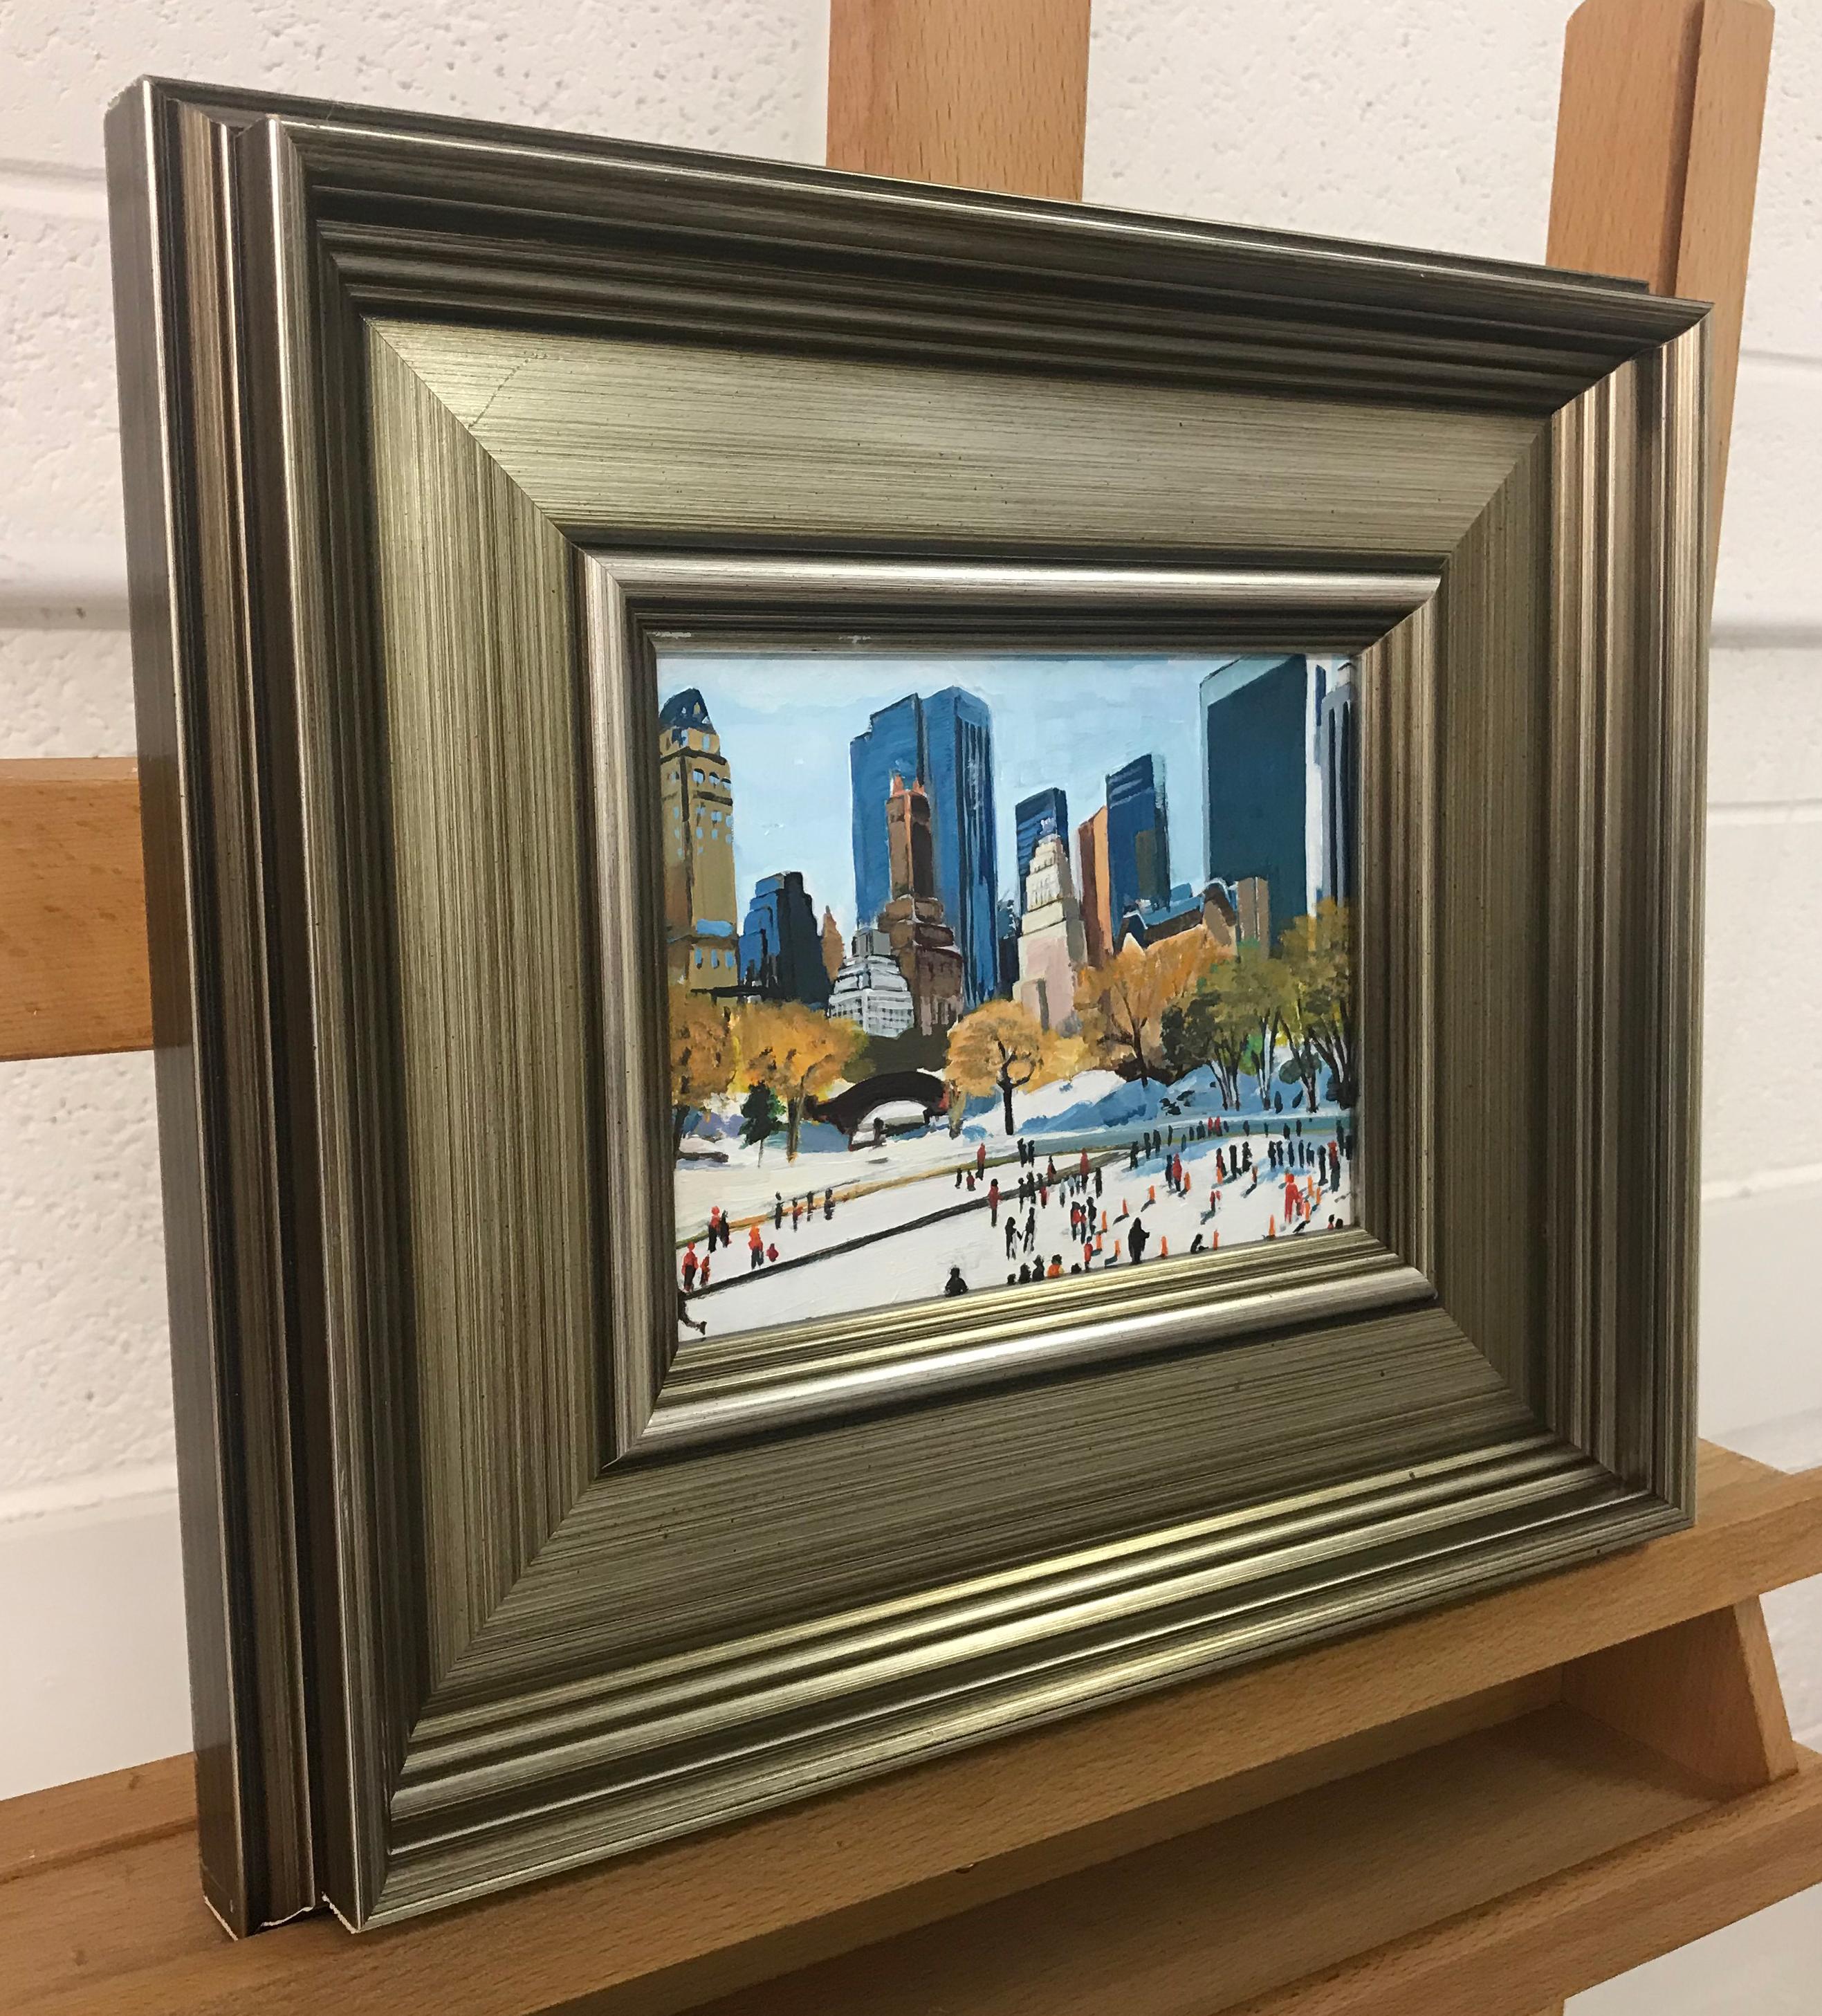 Miniature Painting of Skaters in Central Park New York City by British Artist - Gray Figurative Painting by Angela Wakefield